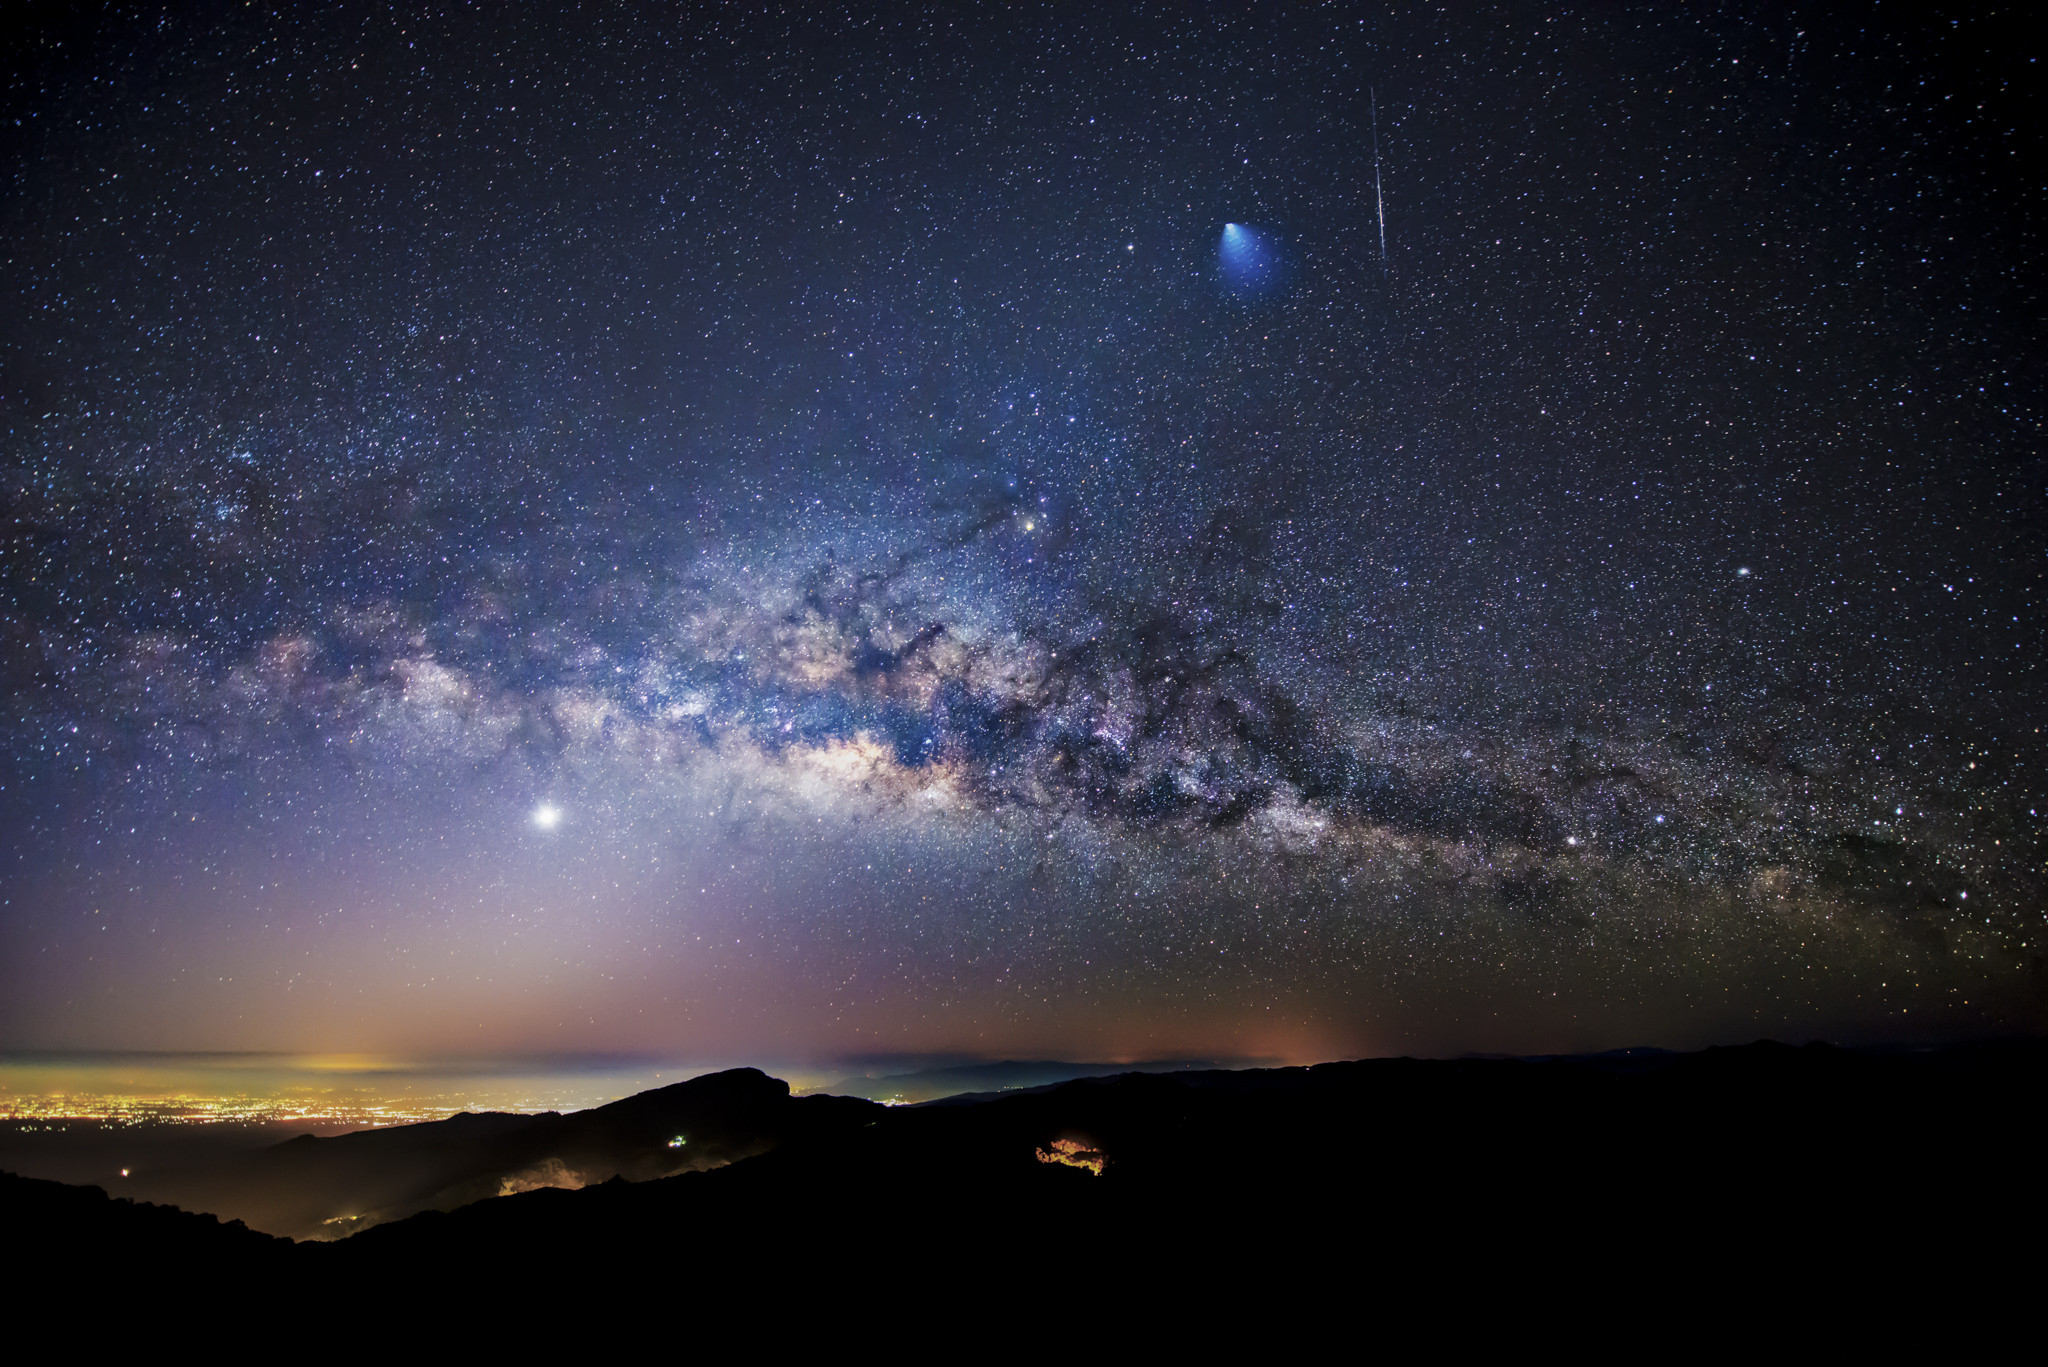 Apod: 2014 February 12 - Rocket, Meteor, And Milky Way  Astronomy Picture Of The Day Pictures